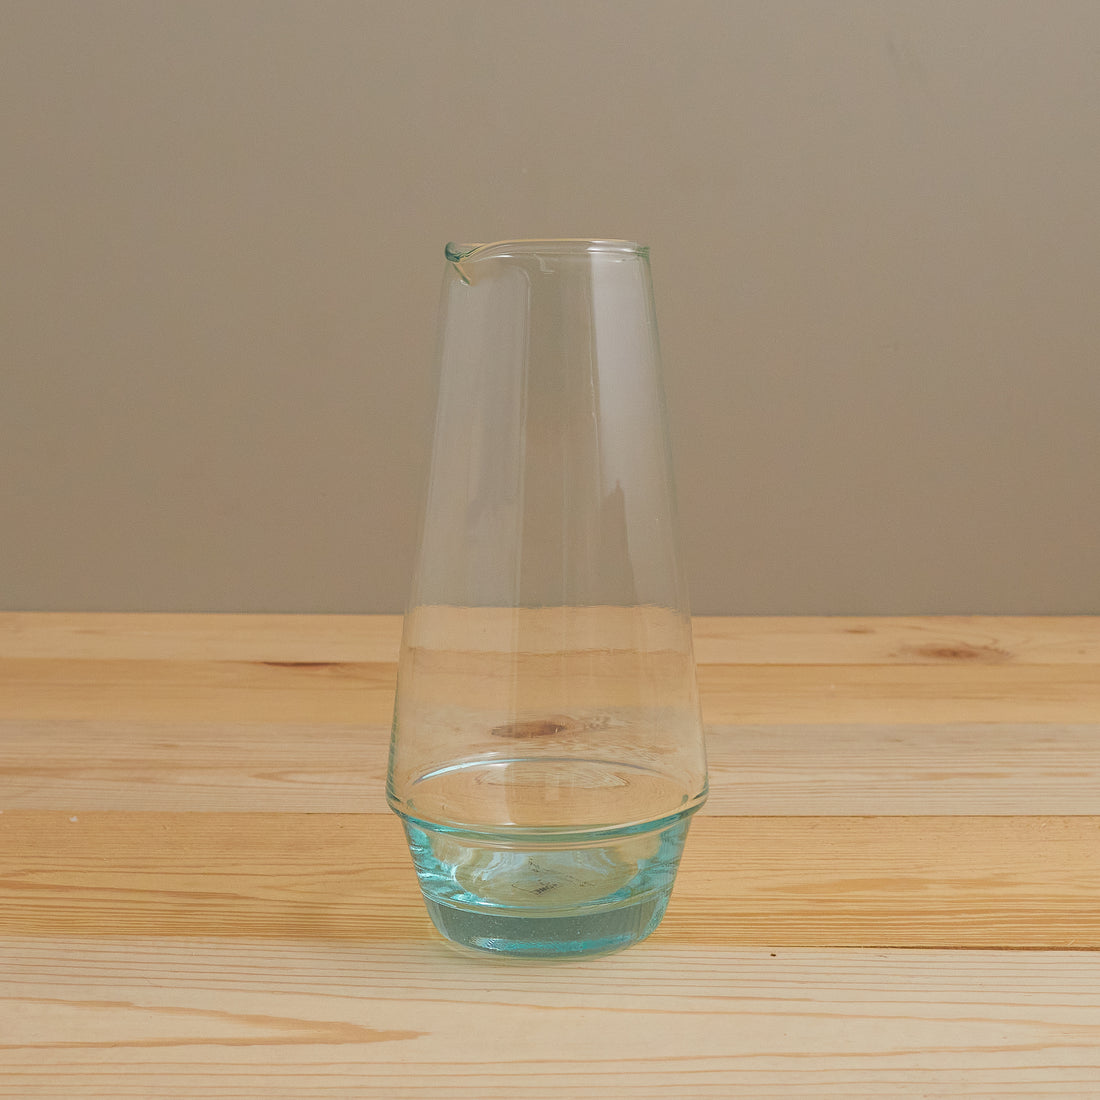 Premium Recycled Glass Carafe